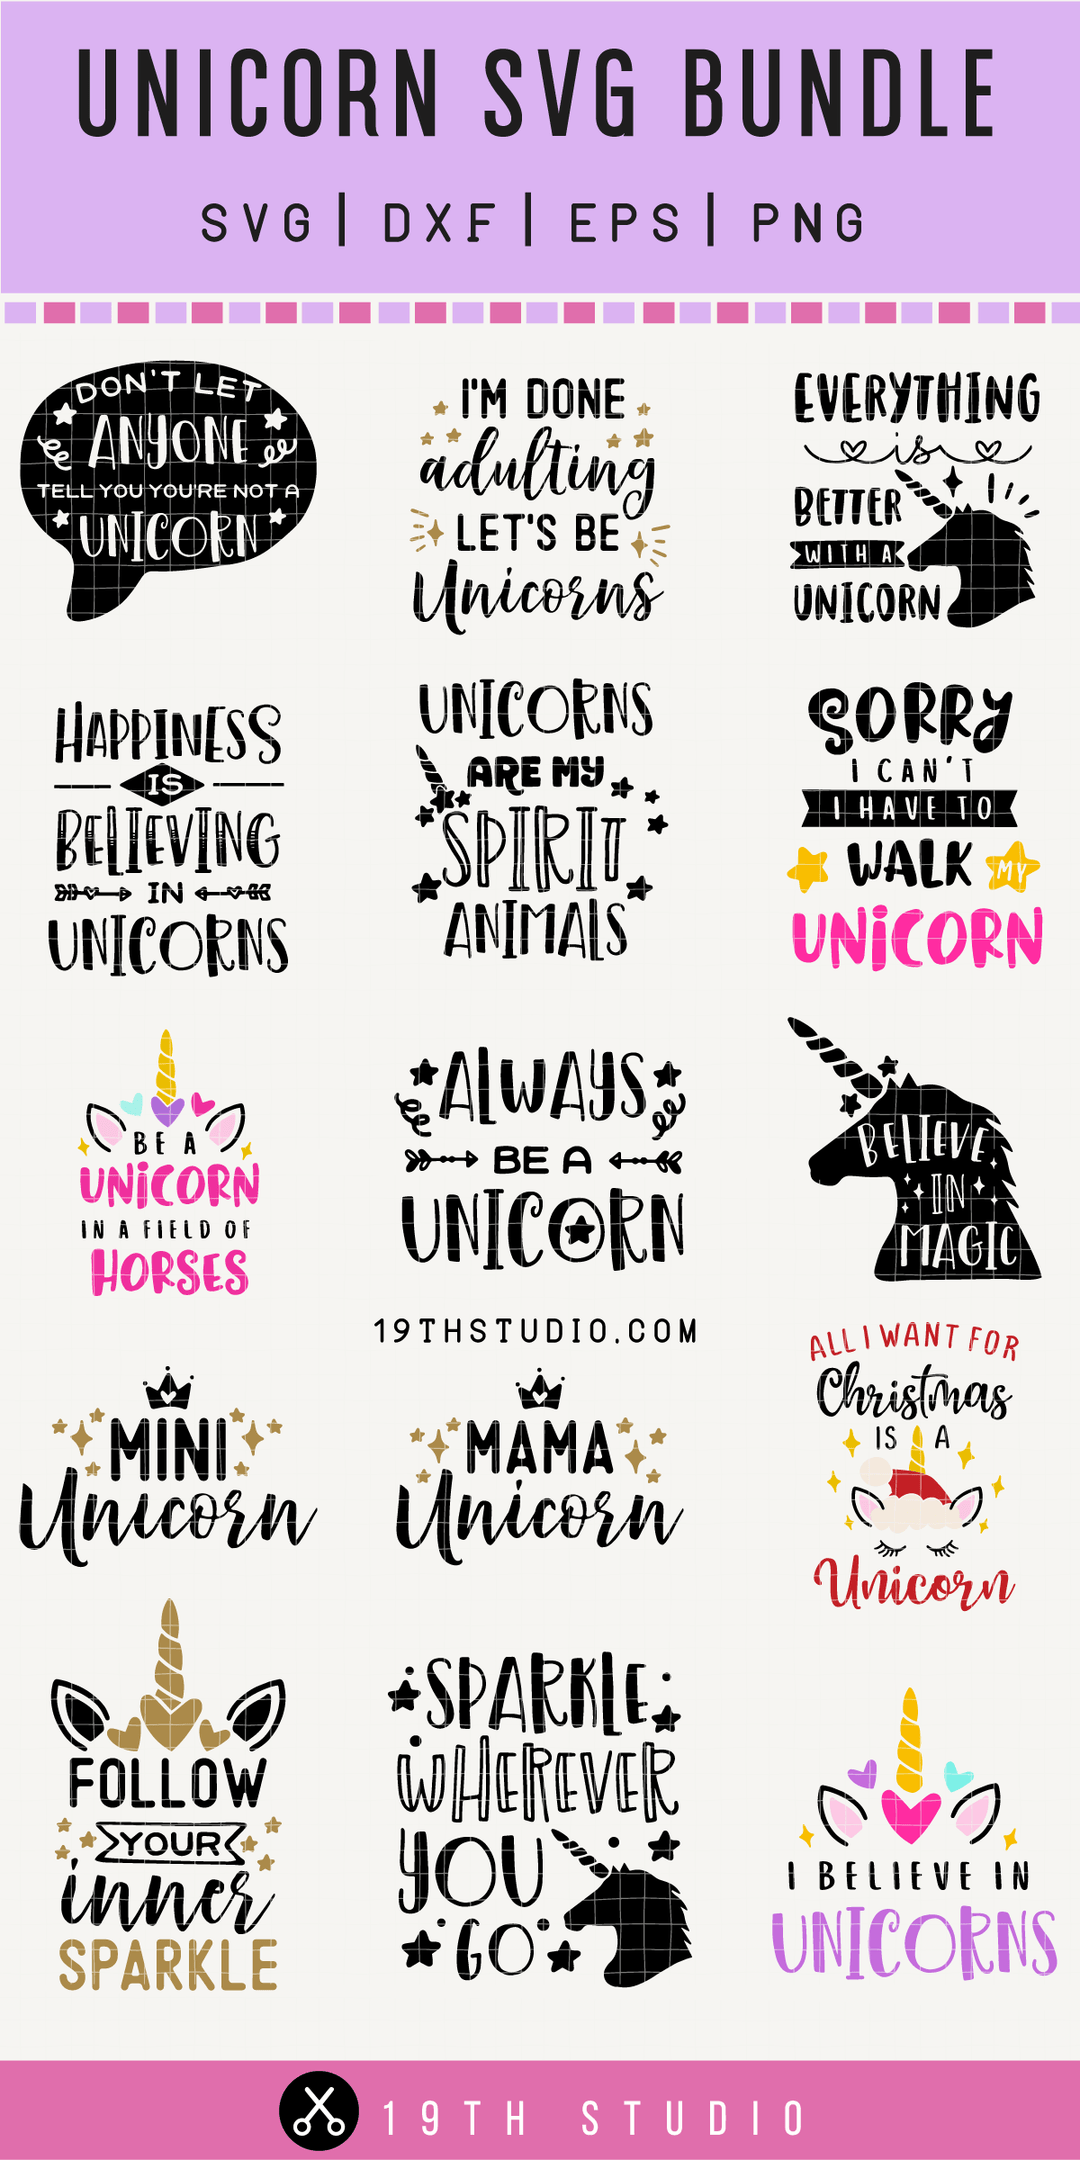 Unicorn SVG bundle - MB41 Craft House SVG - SVG files for Cricut and Silhouette